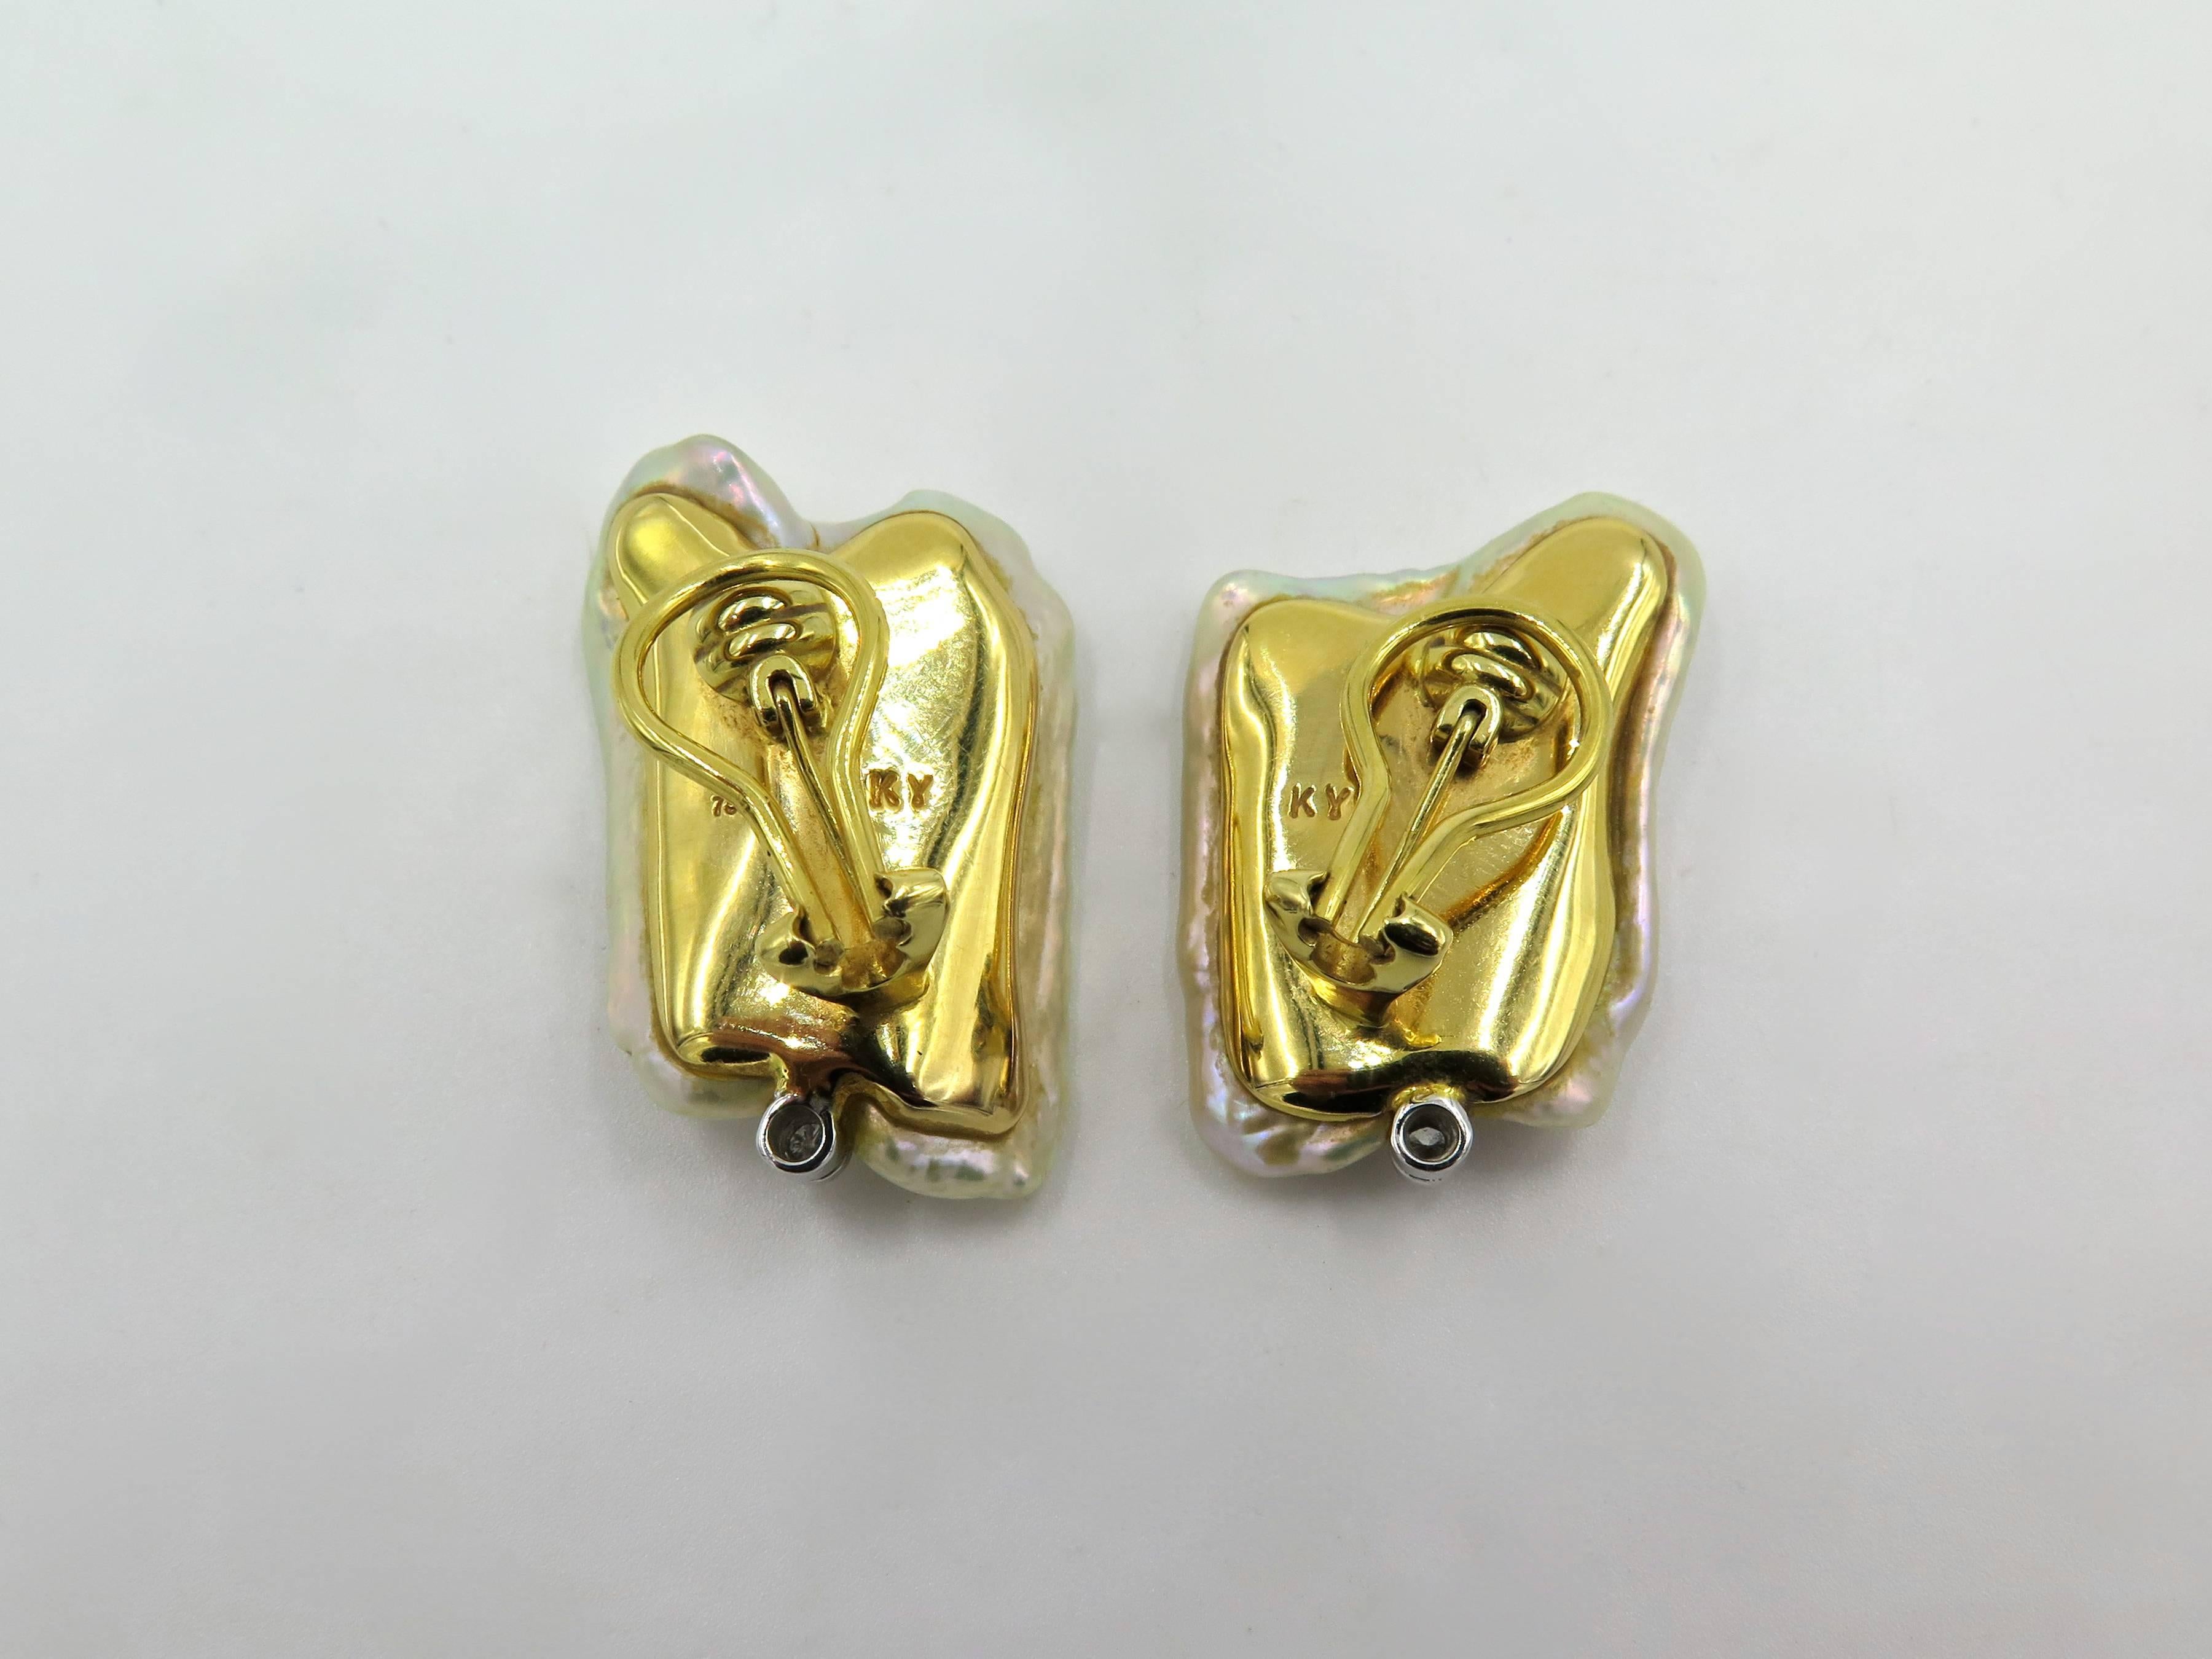 A pair of 18 karat yellow gold, Biwa pearl and diamond earrings. Circa 2000. Kai Yin Lo. Each set with a white Biwa pearl, enhanced by a circular cut diamond. Length is approximately 1 1/8 inches, gross weight is approximately  19.0 grams. Stamped